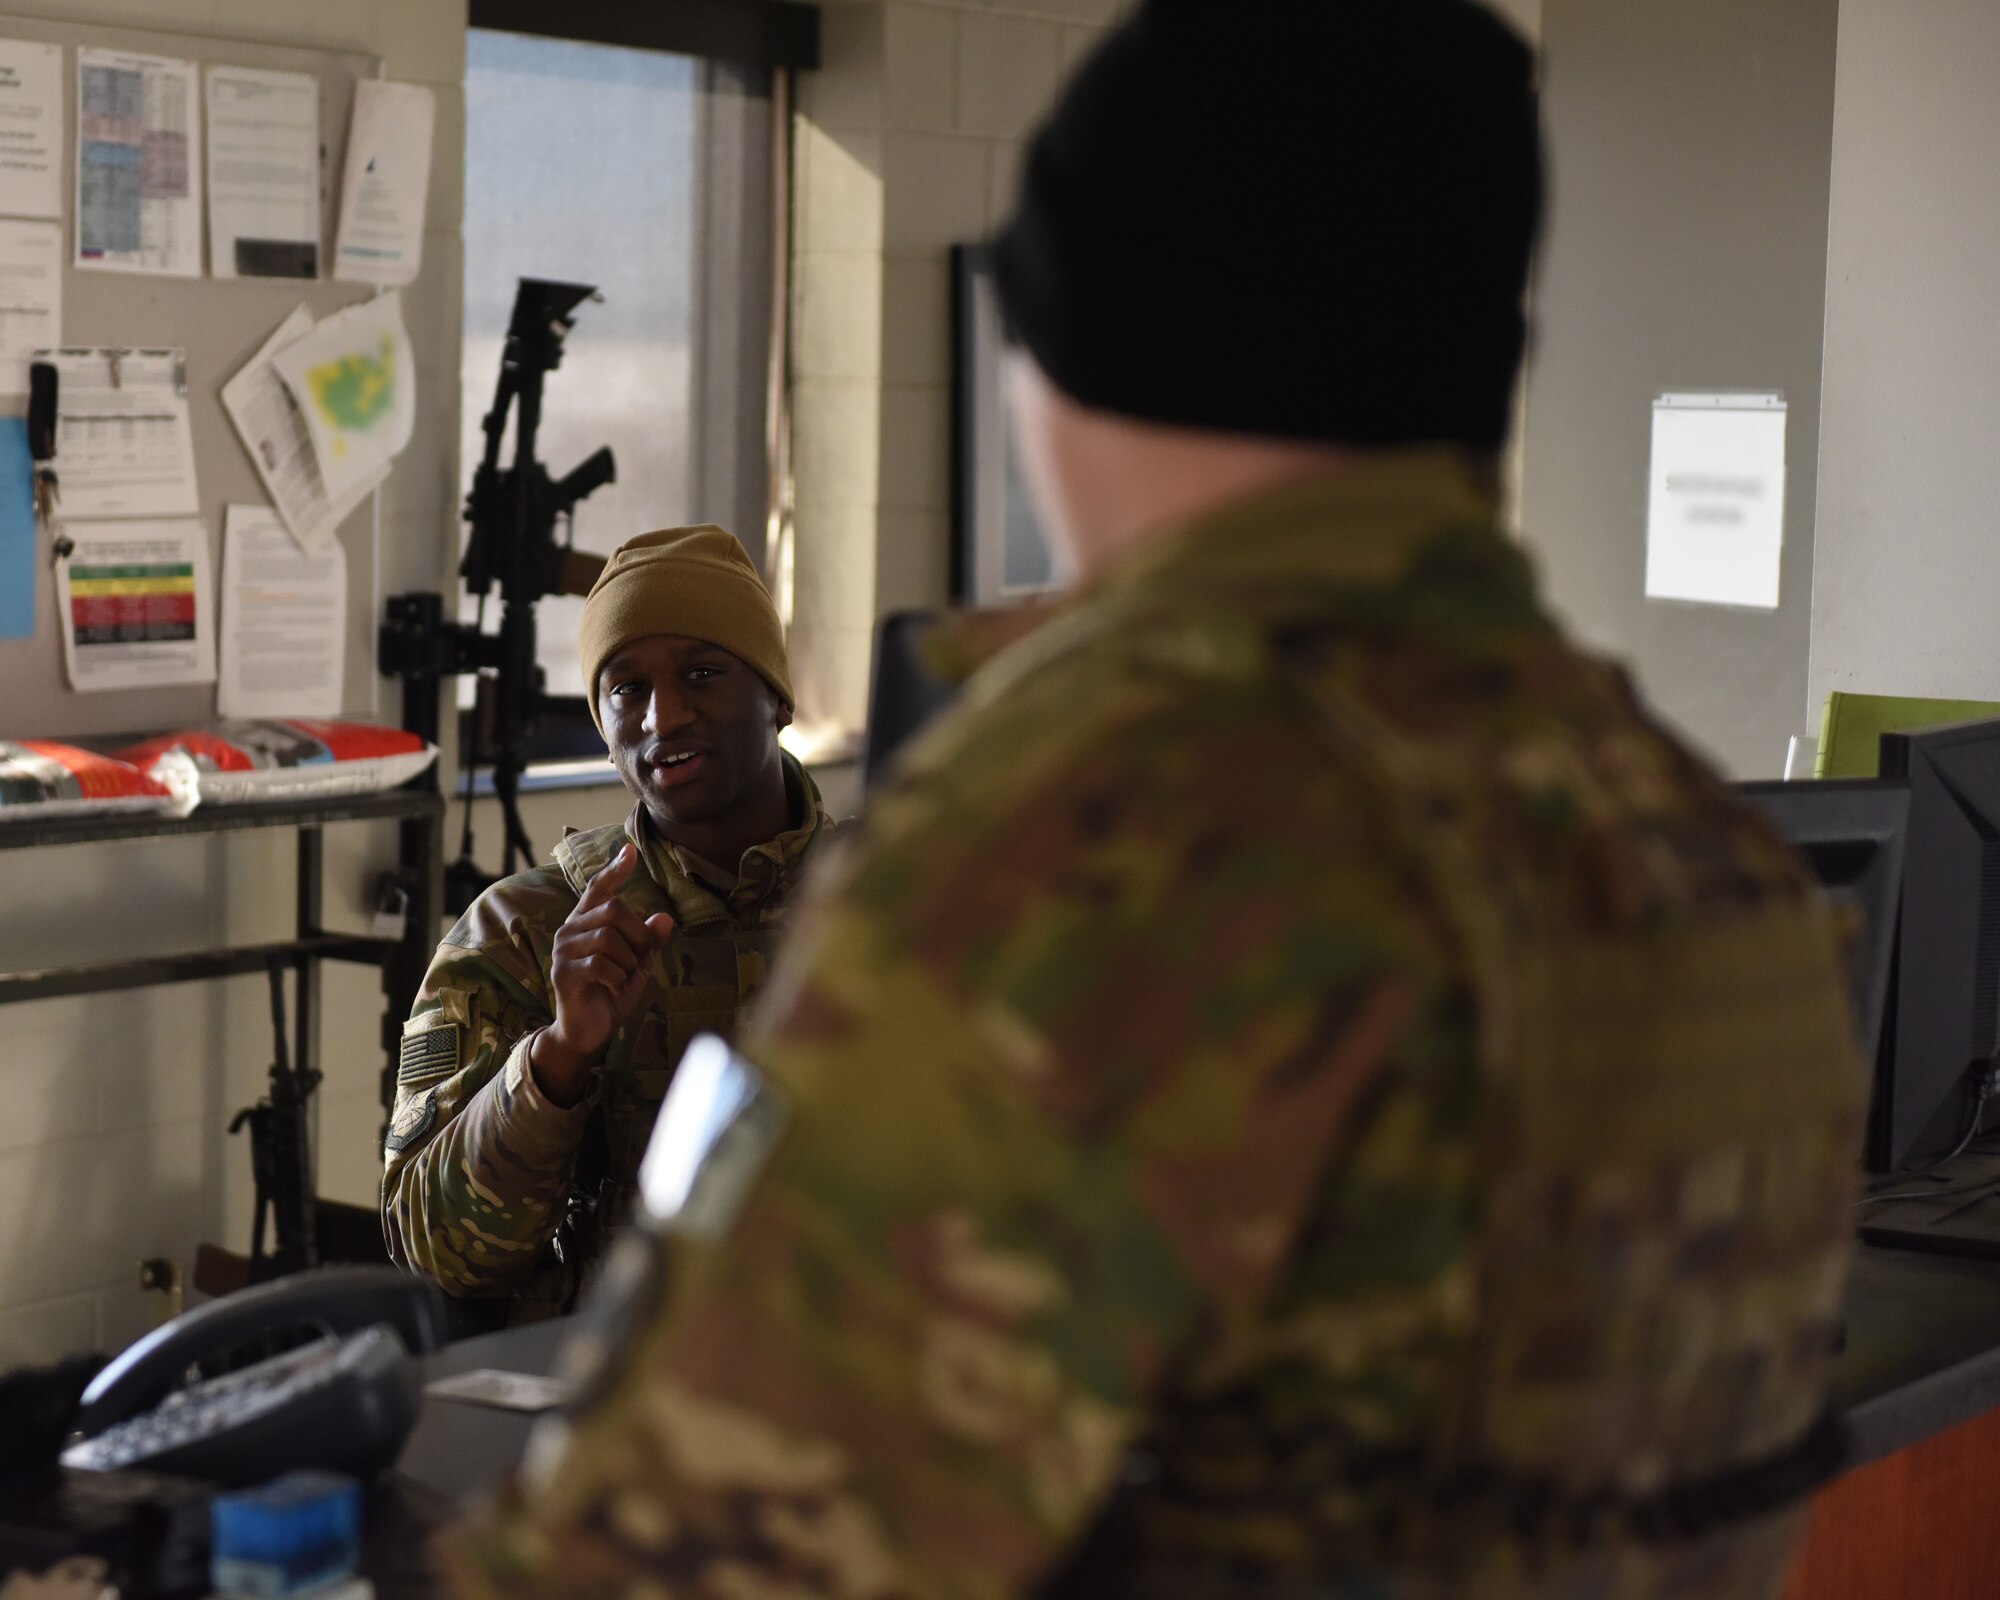 Staff Sgt. Omari-Darnell Ferguson and Senior Airman Taylor Tschida, both 28th Security Forces Squadron alarm monitors, talk inside the gate shack at the Liberty Gate on Ellsworth Air Force Base, S.D., Dec. 4, 2018. Each person that comes through the gate gets checked for proper authorization, correct seatbelt wear and that their vehicle has registration on the plates. (U.S. Air Force photo by 2nd Lt. Joshua Sinclair)